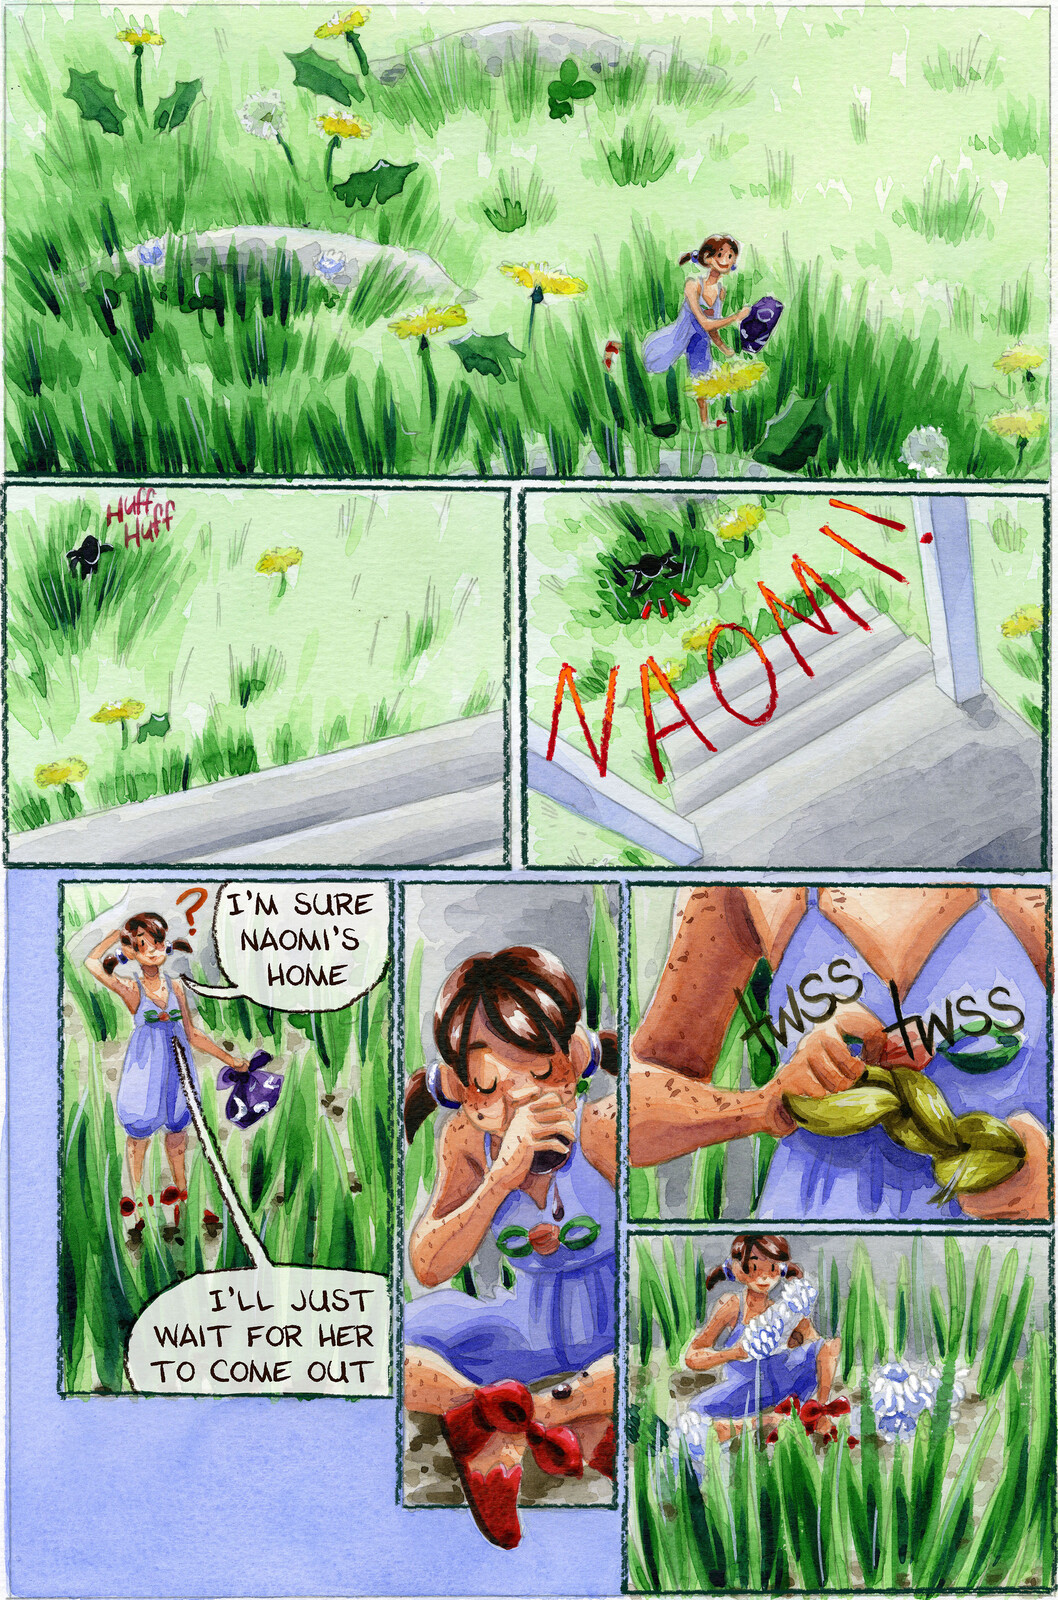 Sample Comic Page from Chapter 8 of 7" Kara